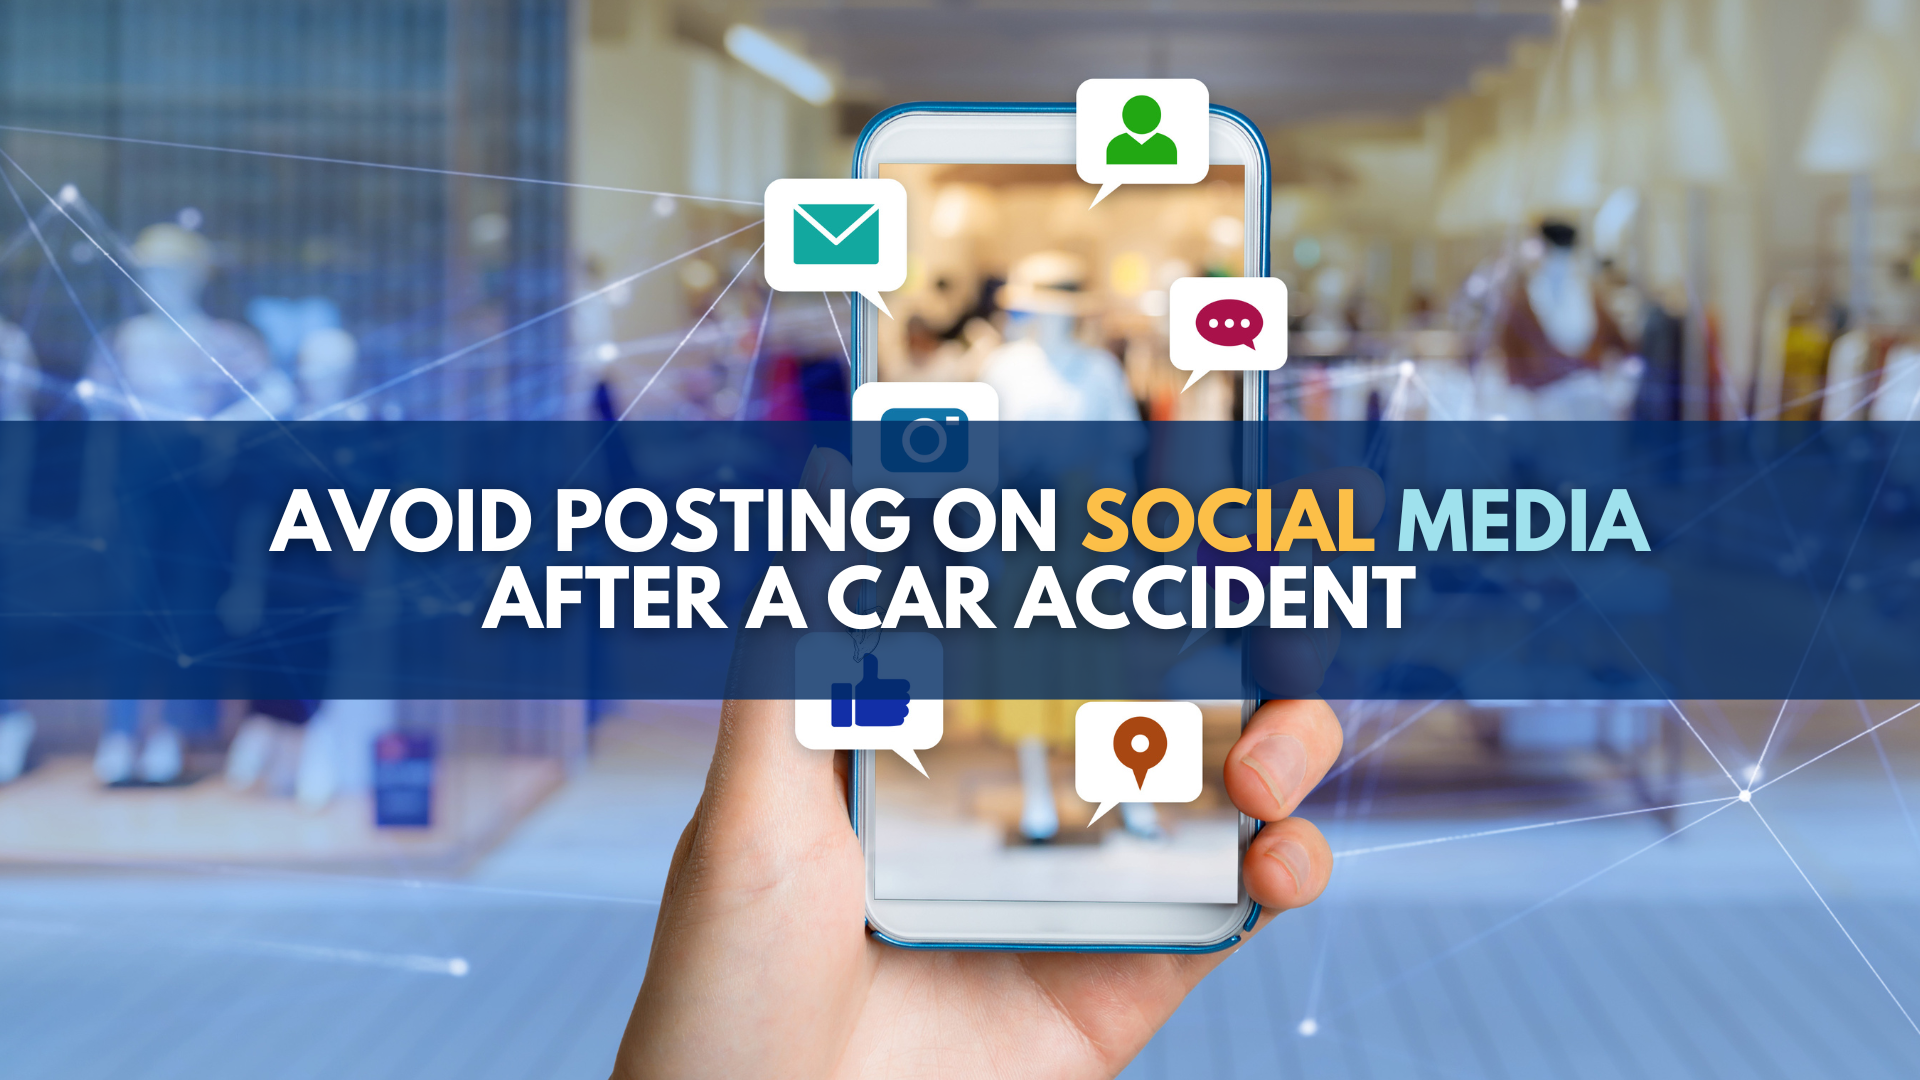 Posting On Social Media After A Car Accident: Avoid It